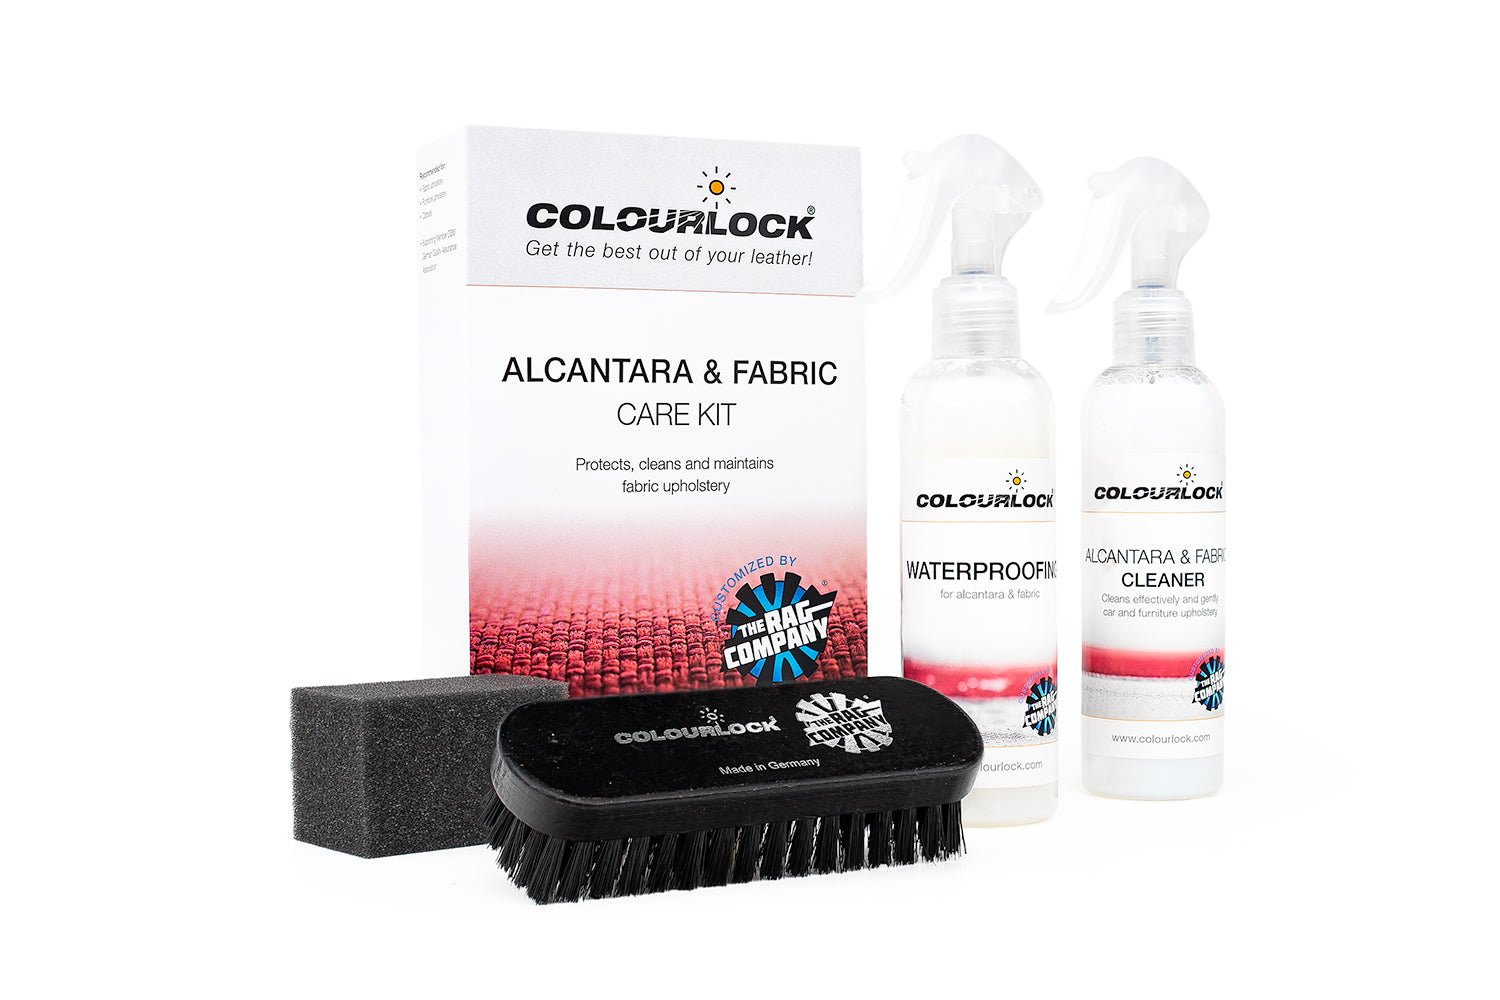 Compare prices for COLOURLOCK across all European  stores